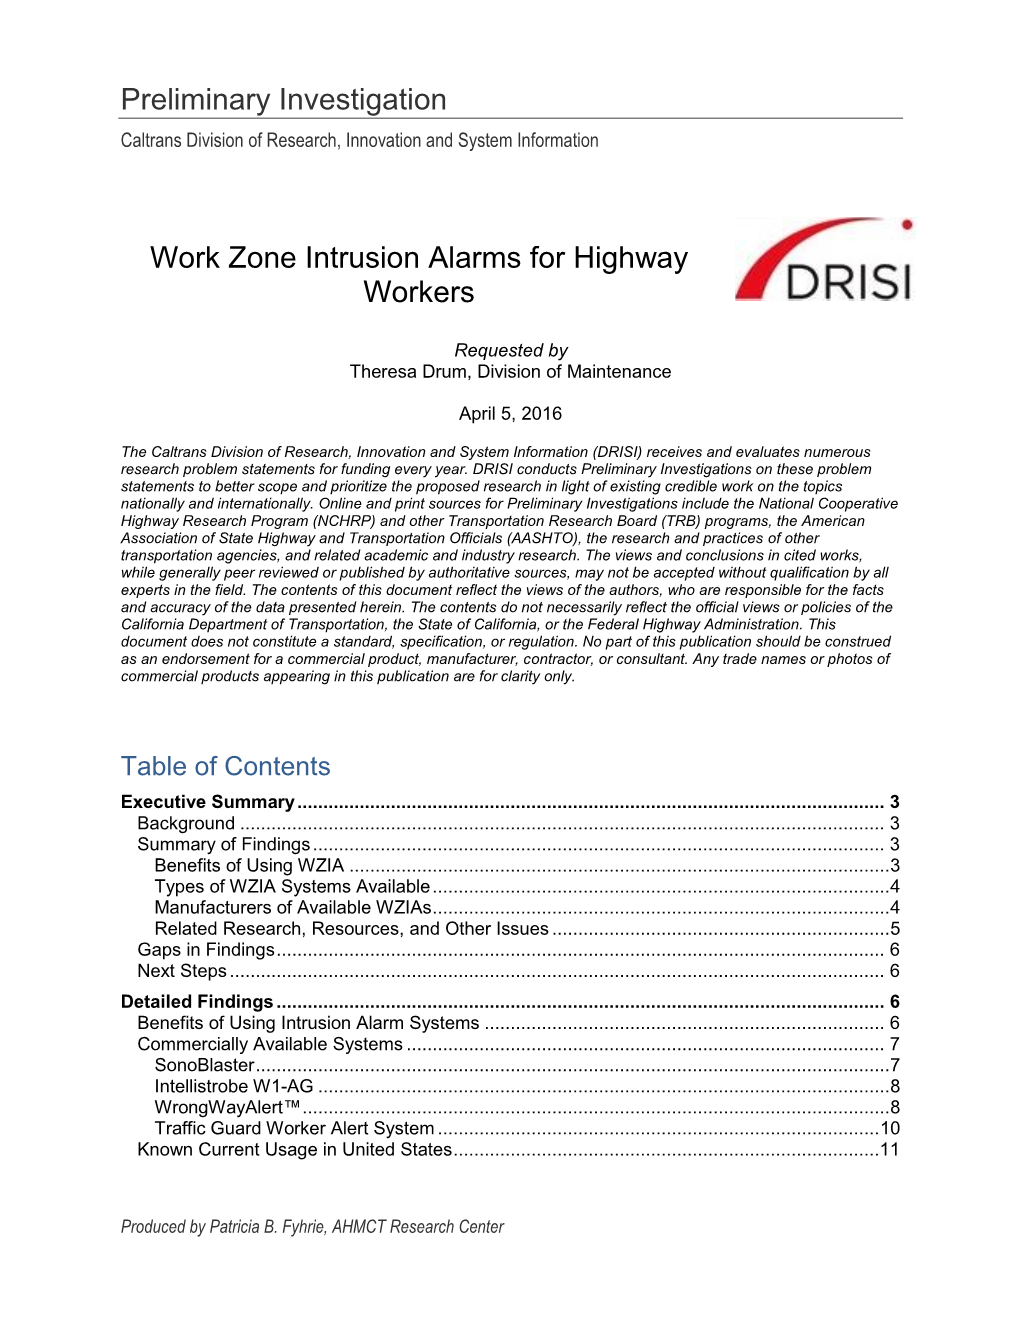 Work Zone Intrusion Alarms for Highway Workers